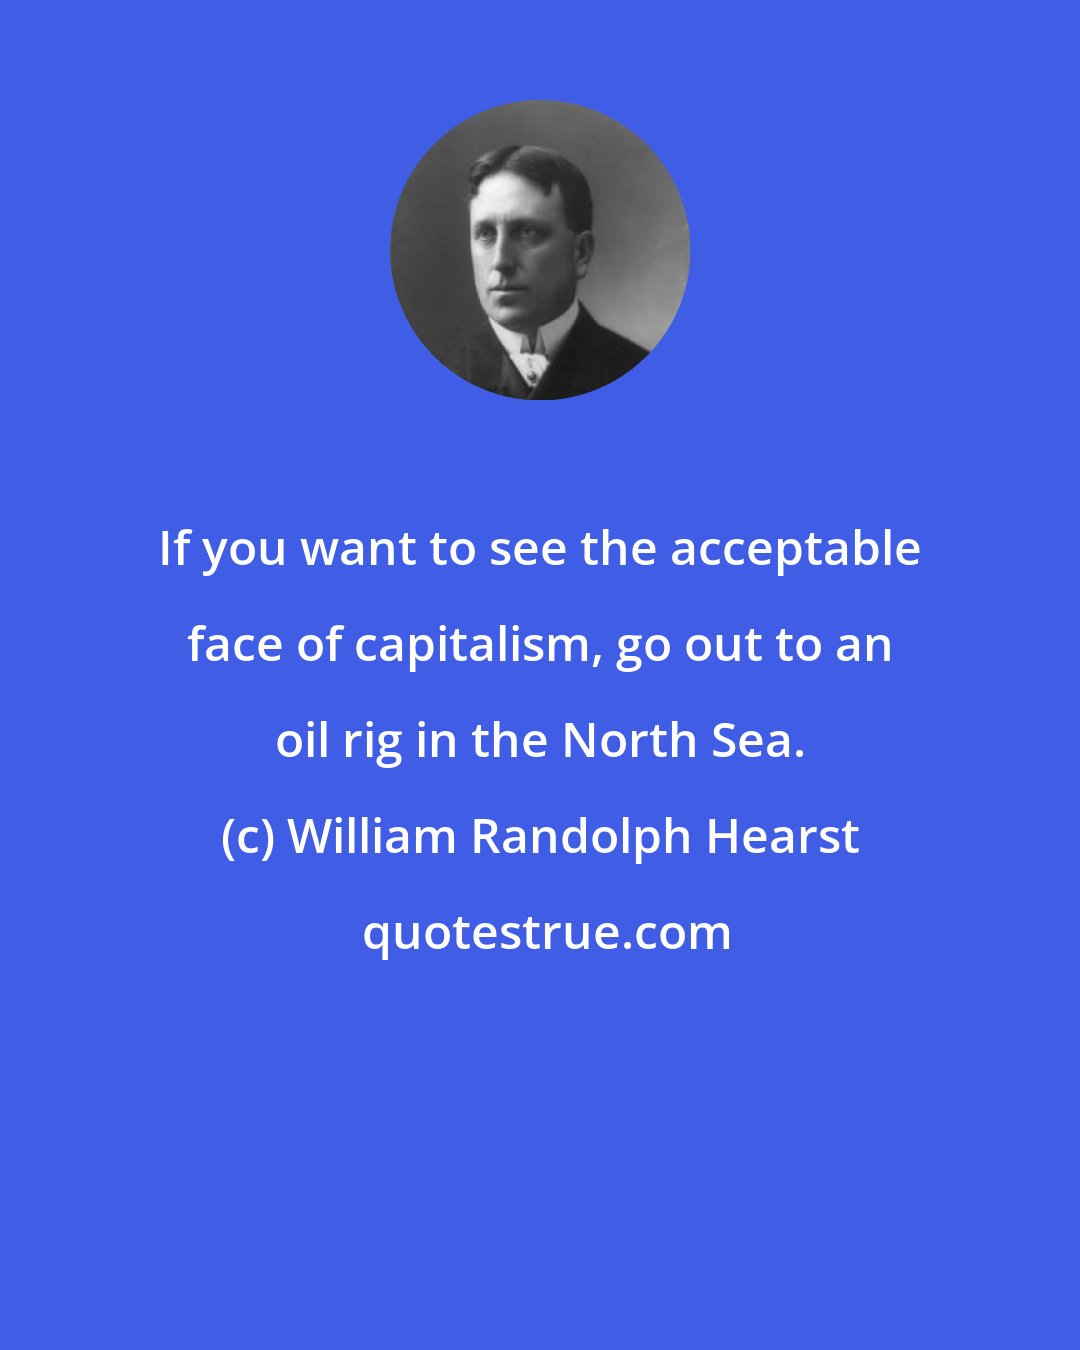 William Randolph Hearst: If you want to see the acceptable face of capitalism, go out to an oil rig in the North Sea.